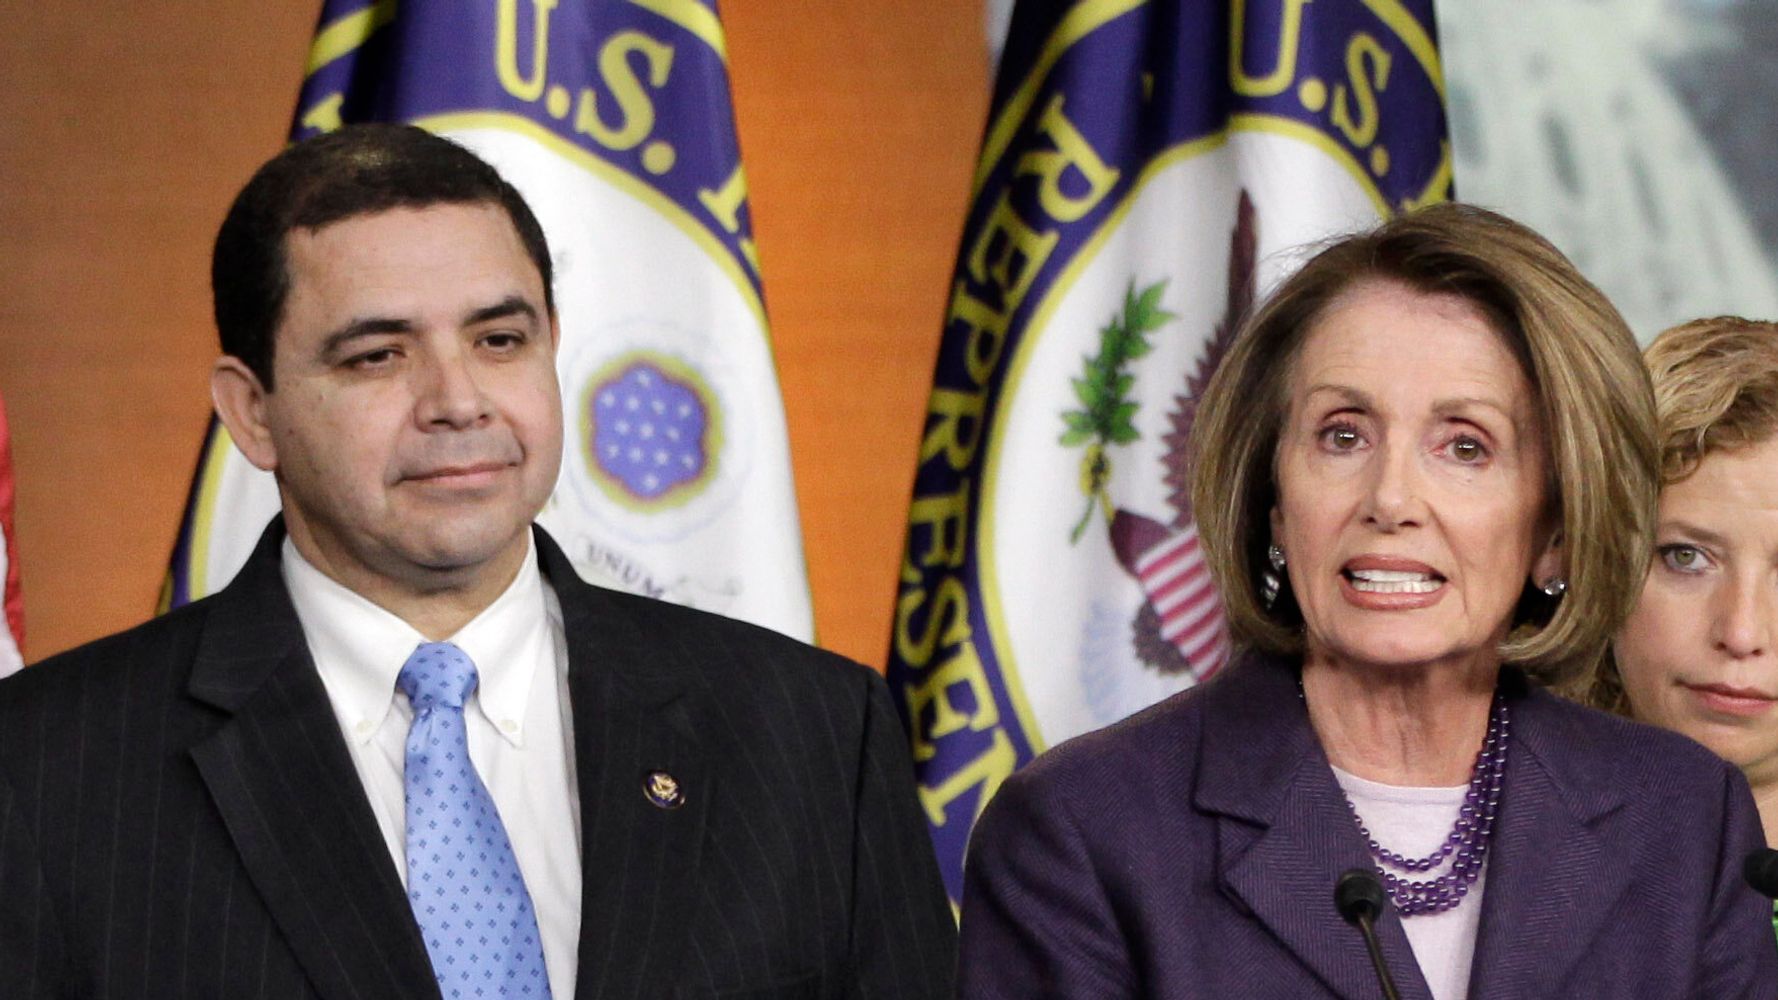 House Speaker Nancy Pelosi (second from left) endorsed Rep. Henry Cuellar of Texas (far left), a conservative-leaning Democrat, in his race for reelection in 2020.